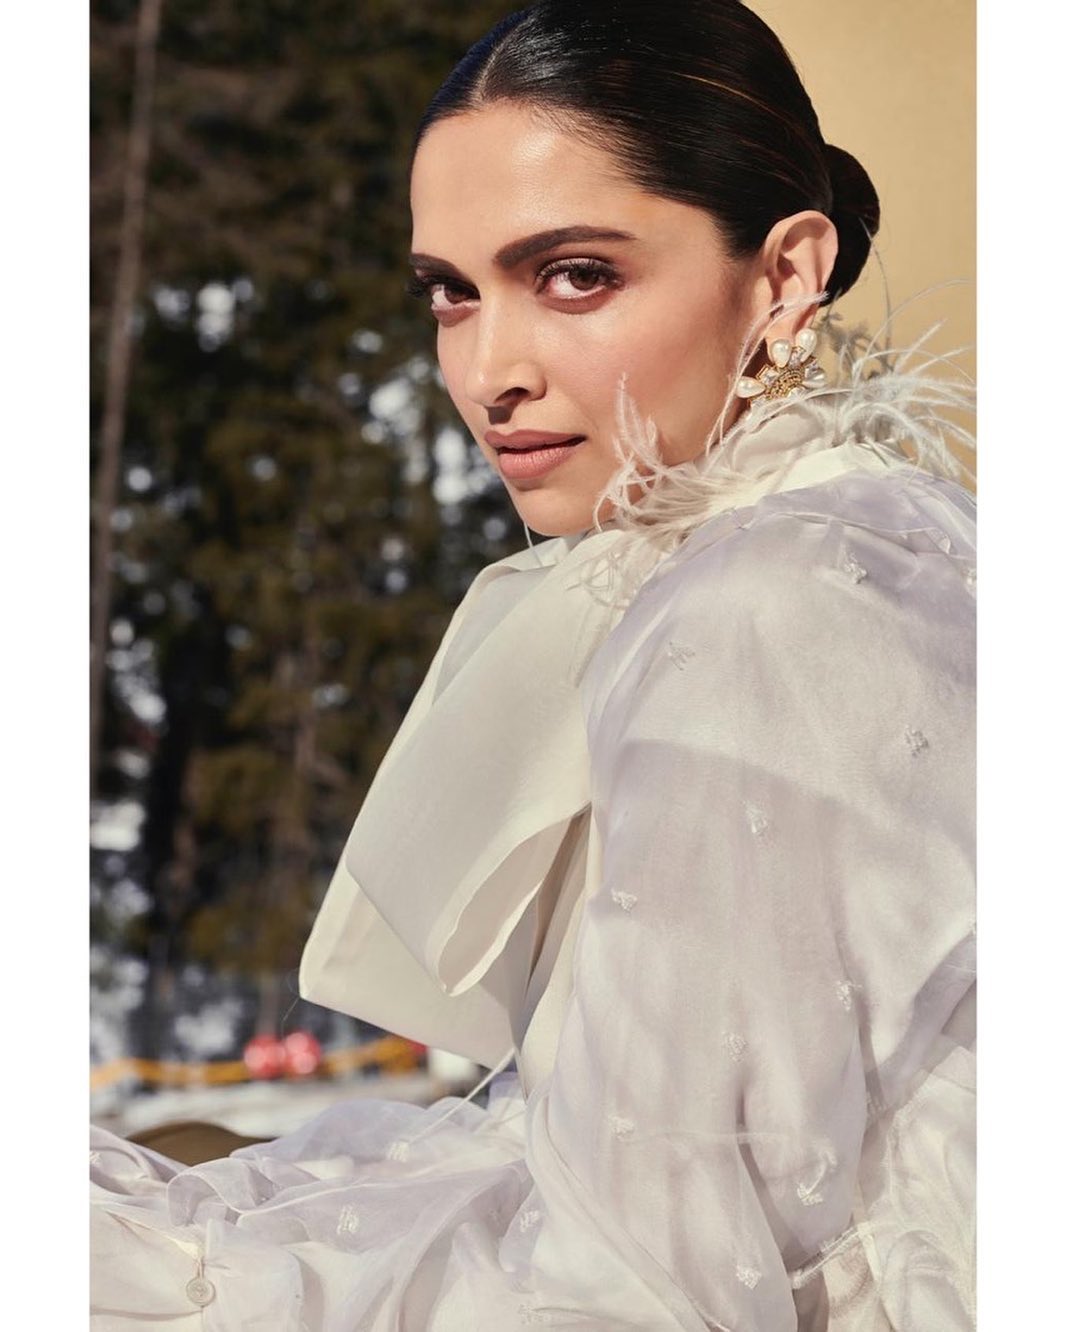 Deepika Padukone to Star in Global Louis Vuitton Campaign, VOGUE India